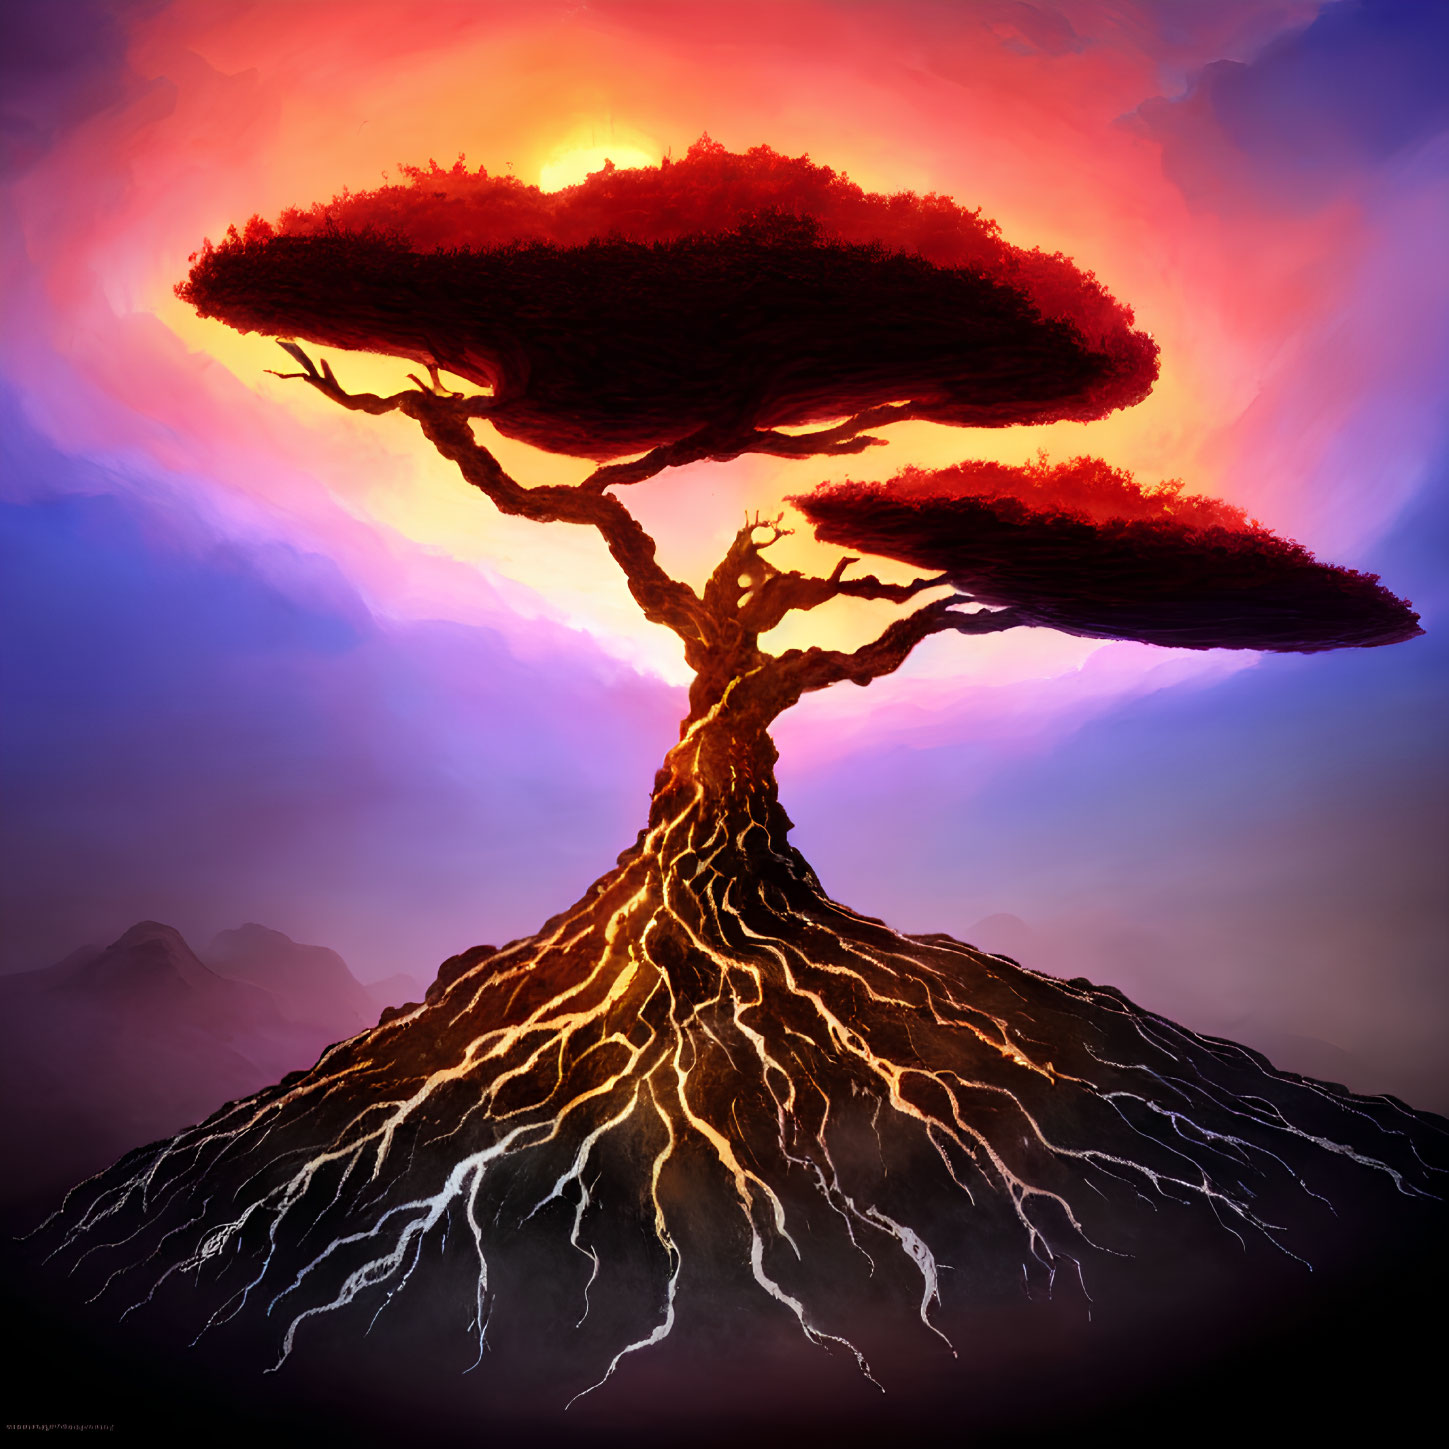 Fantastical tree with lava-like roots under vibrant sky